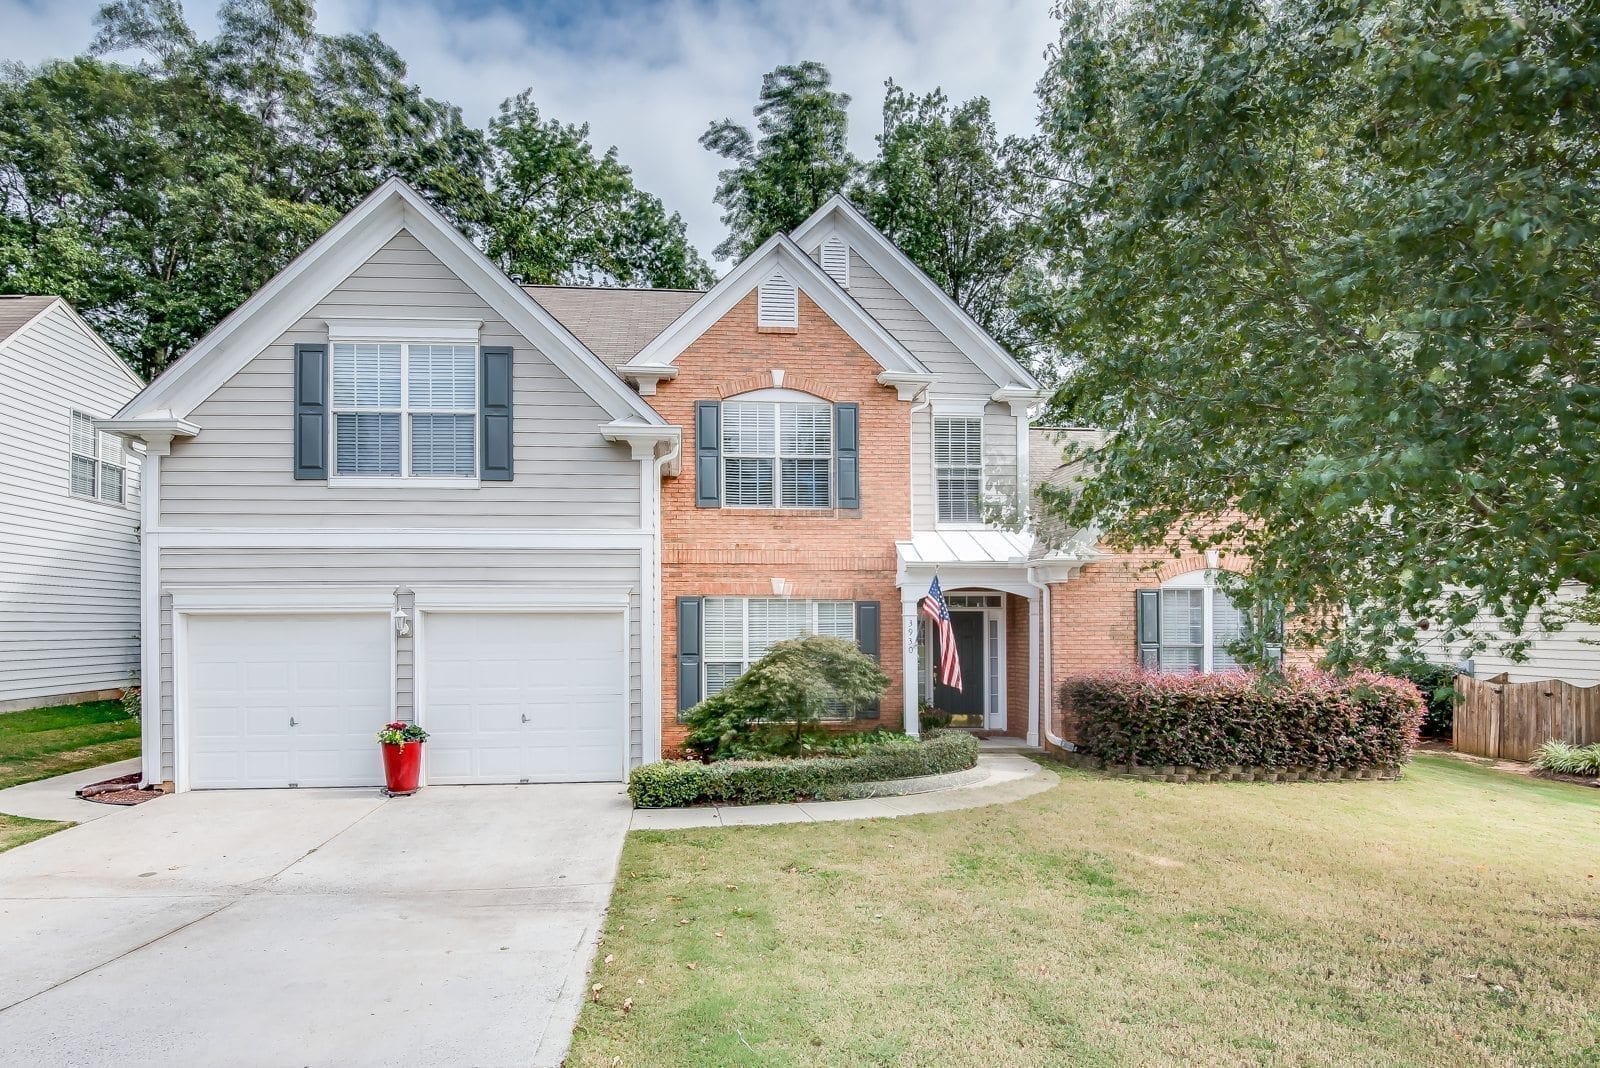 Beautiful home for sale in Willowmere in Charlotte, NC.